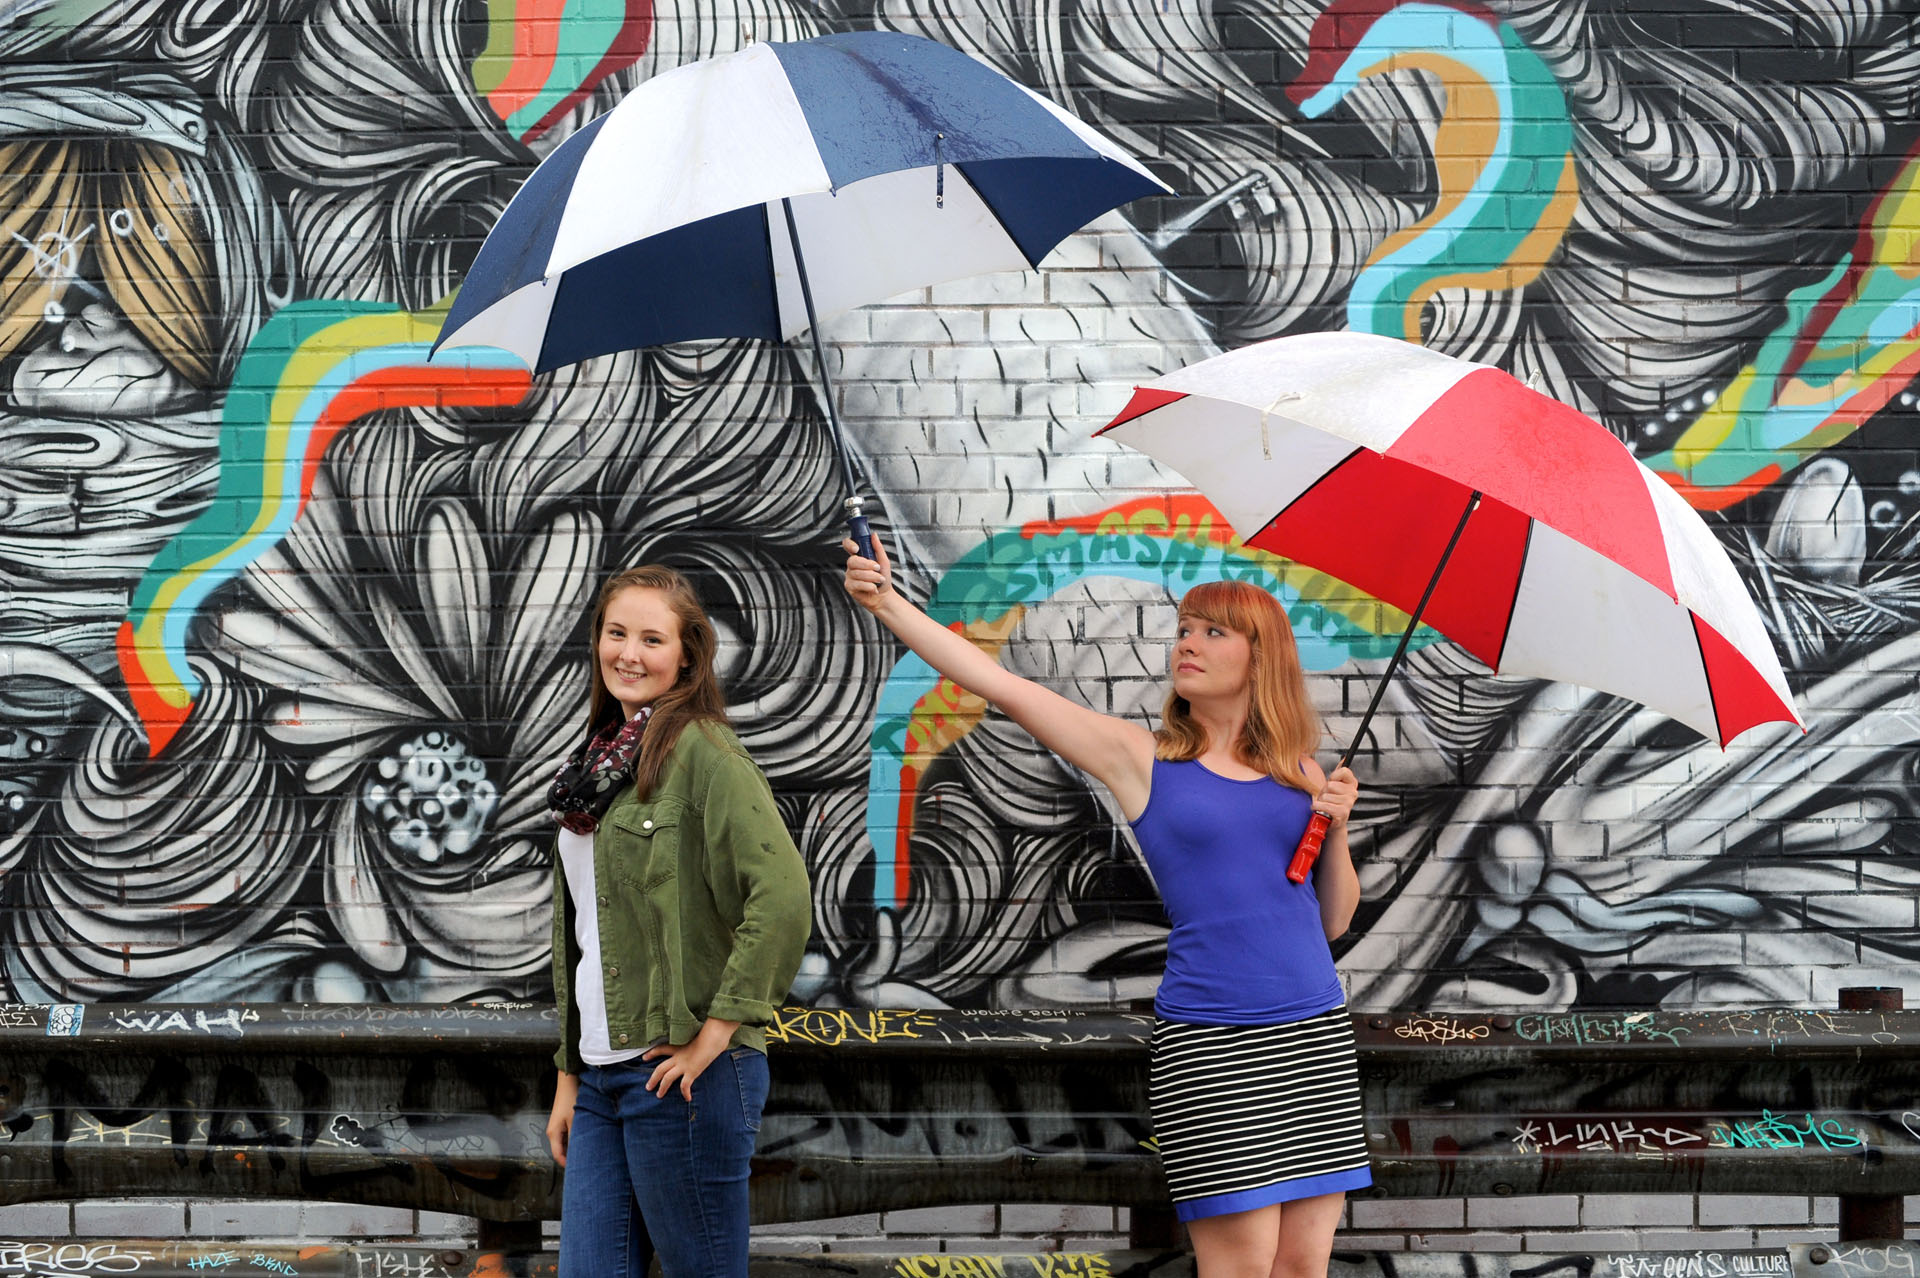 Best Detroit senior photographer's high school senior picture of two seniors helping each other during a rainy senior photo shoot  in downtown Detroit, Michigan.